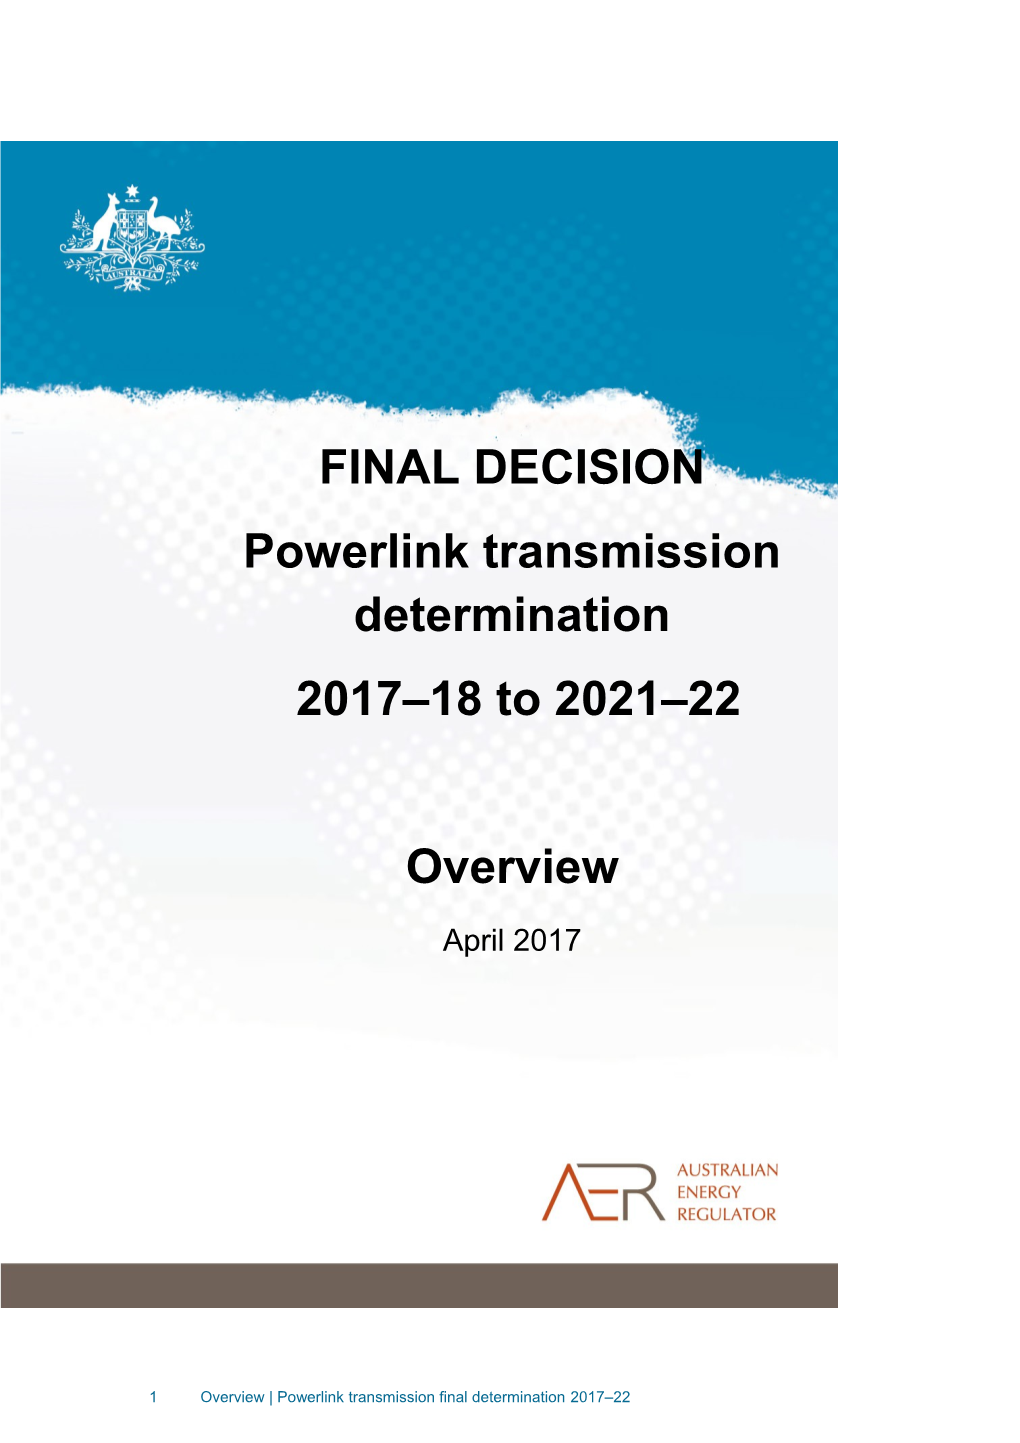 AER Final Decision - Powerlink - Overview